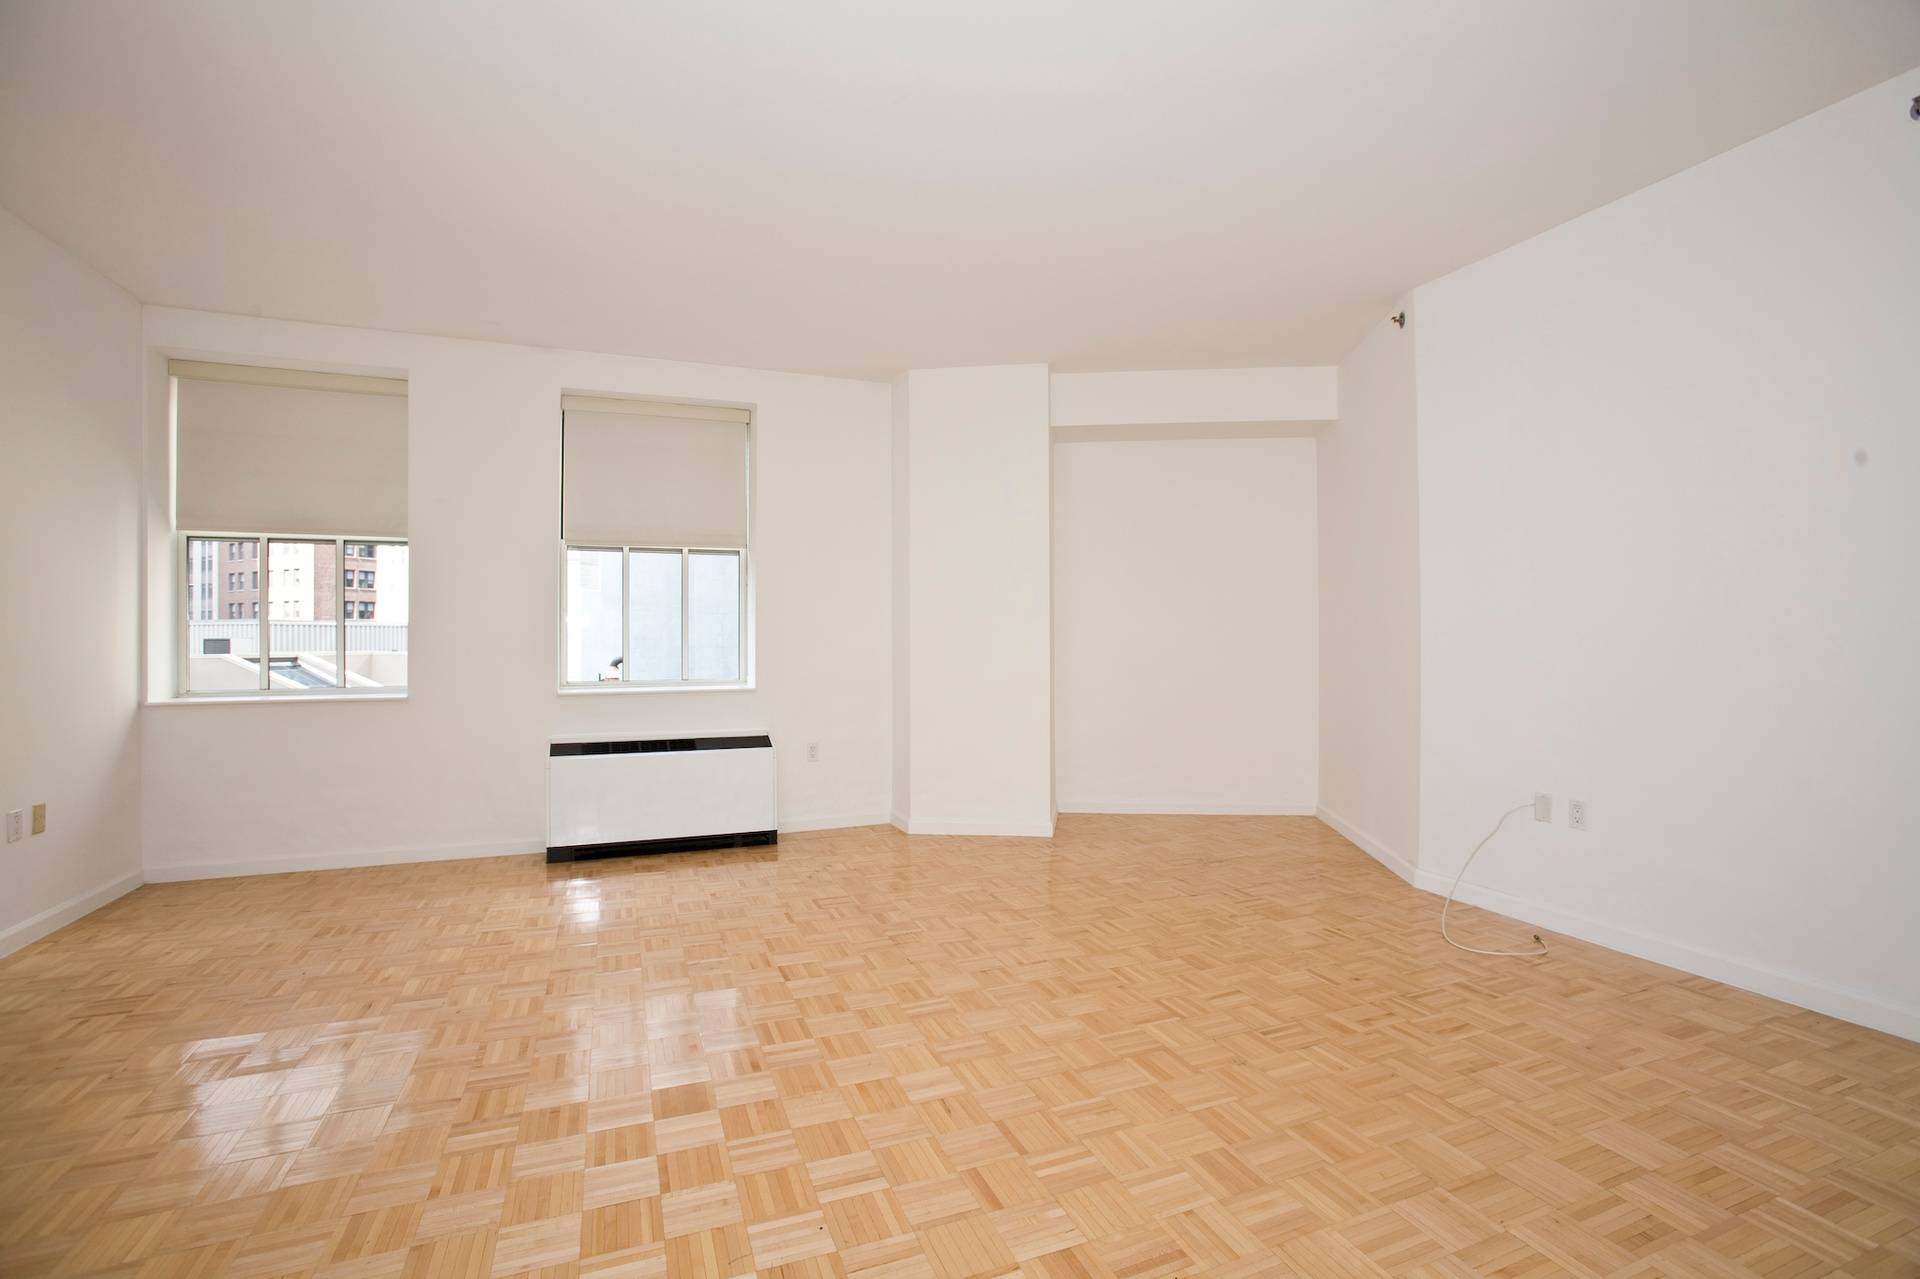 2 Bedroom 1.5 Bathroom Apartment Rental With Space To Flex Divide Into 3 Bedrooms Downtown In The Financial District Near Pace University